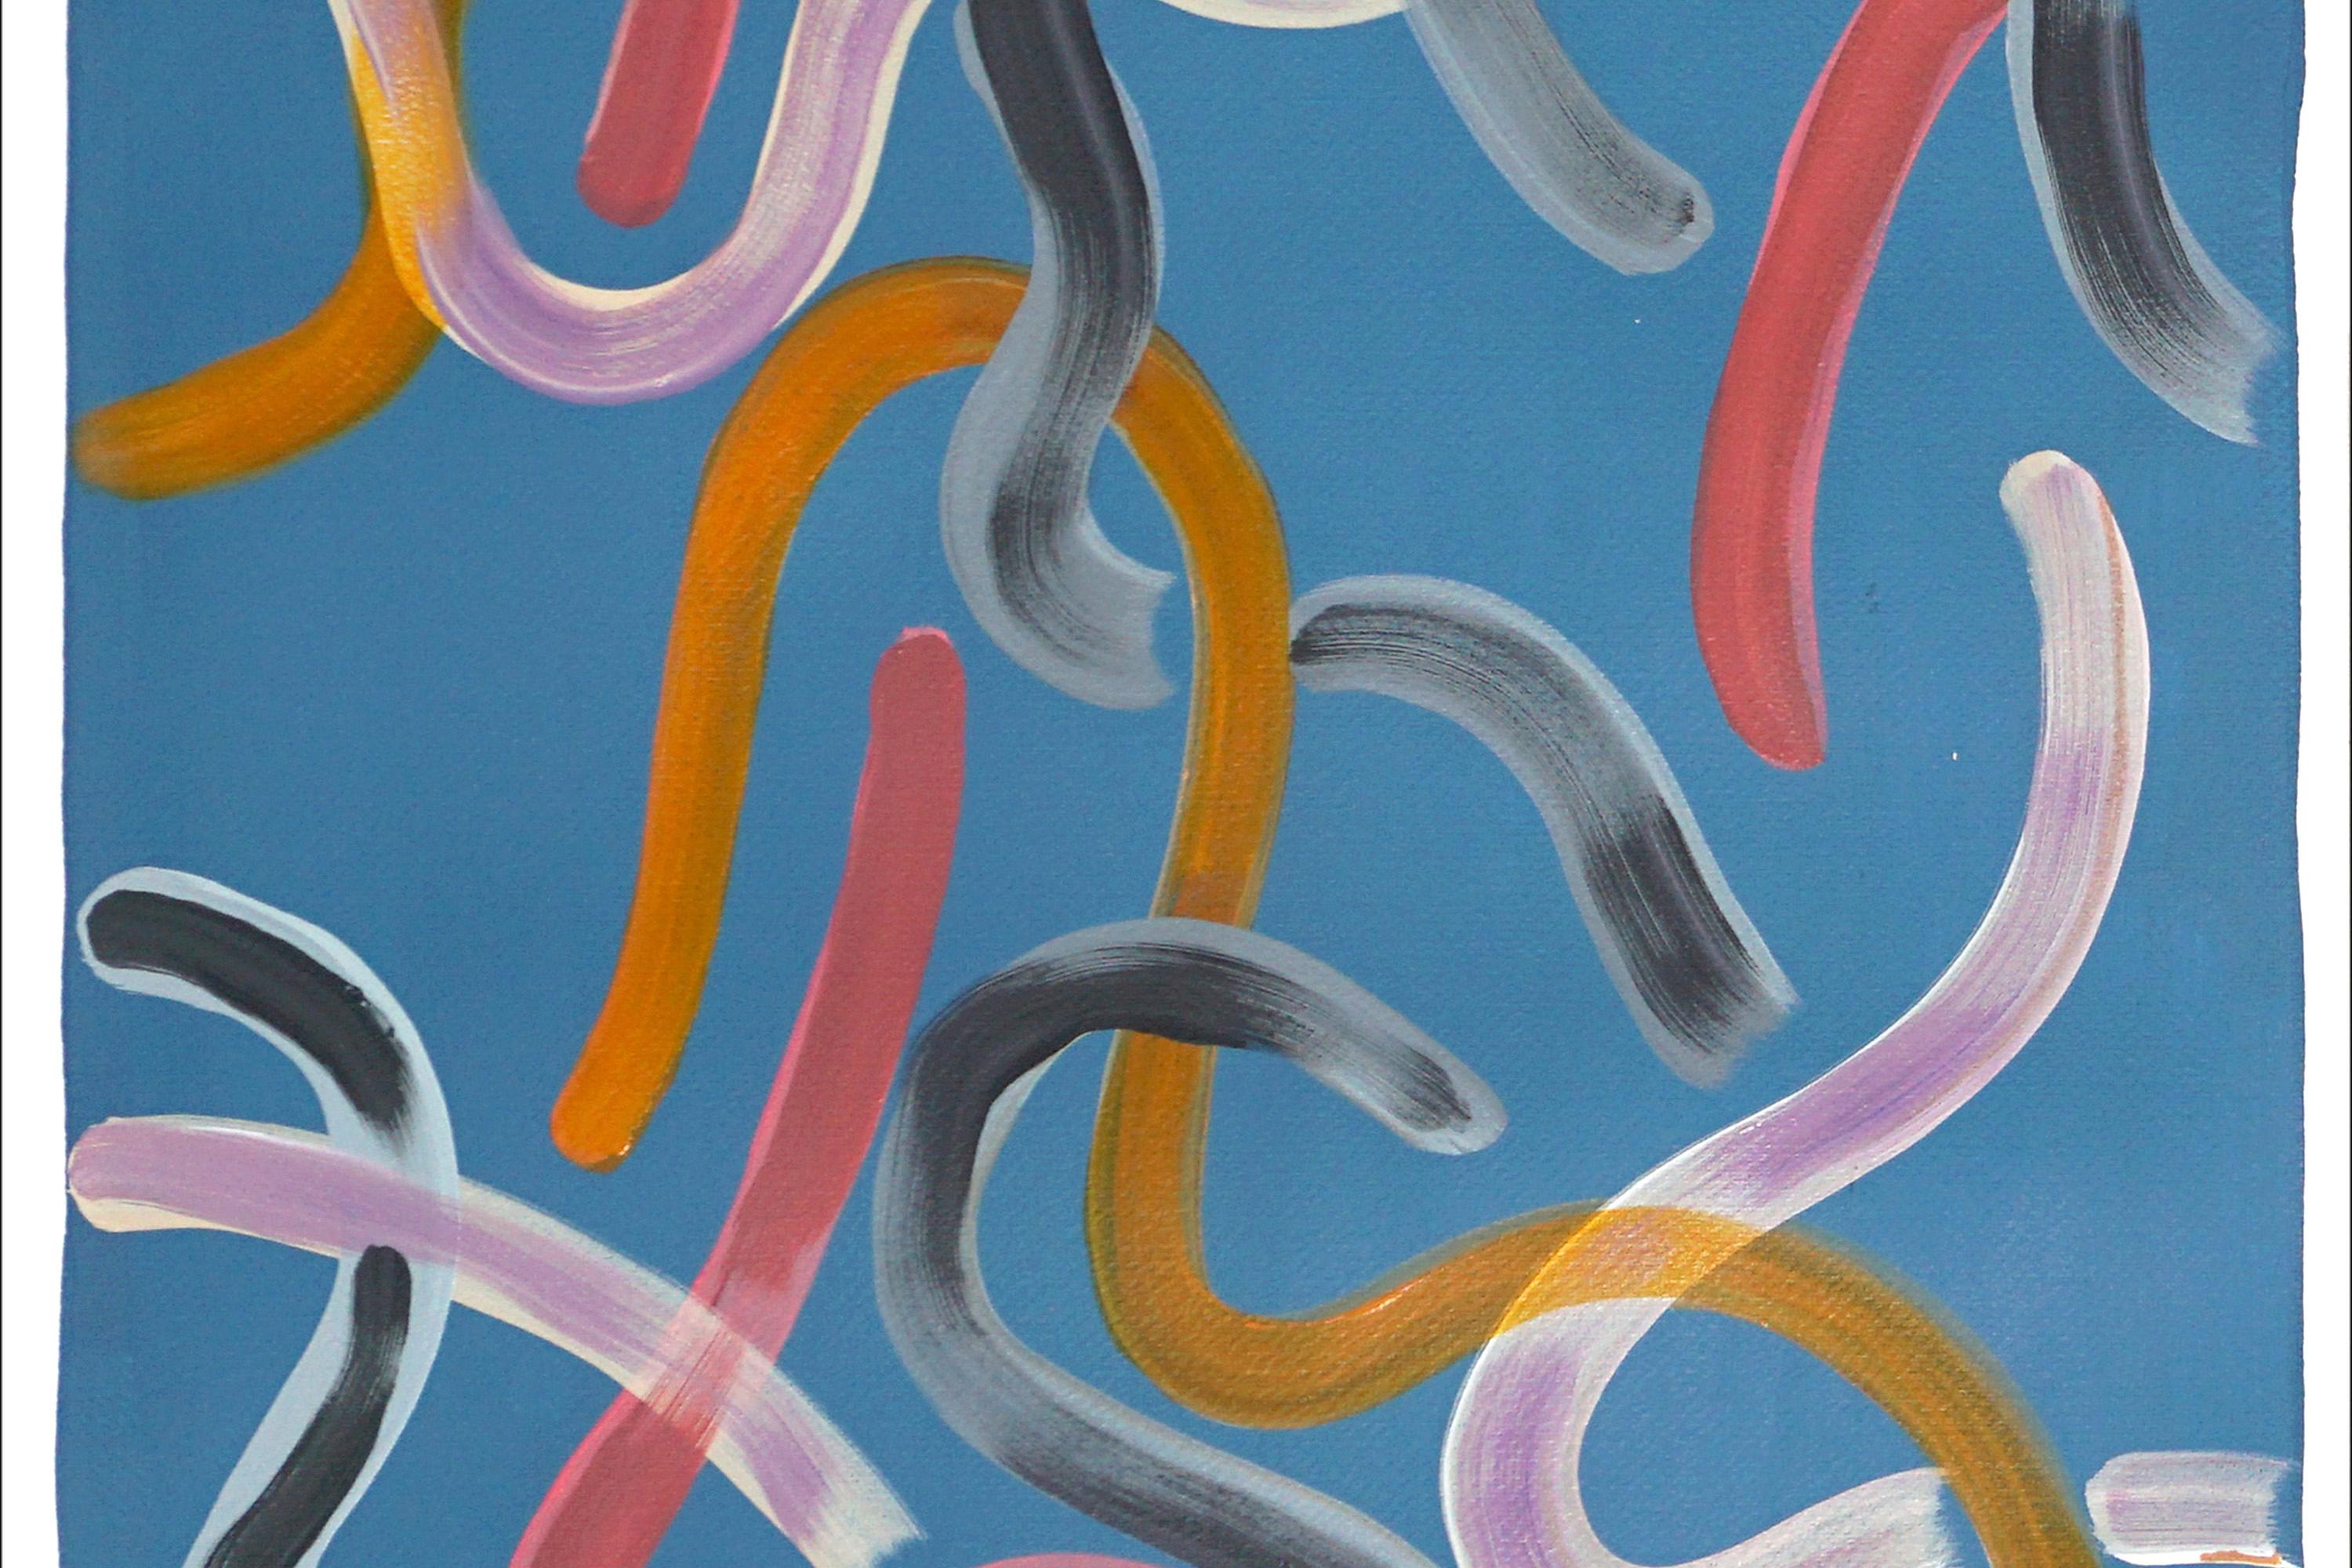 Tame Strokes on Indigo Blue, Twilight Pink and Yellow, Abstract Diptych, Paper  1